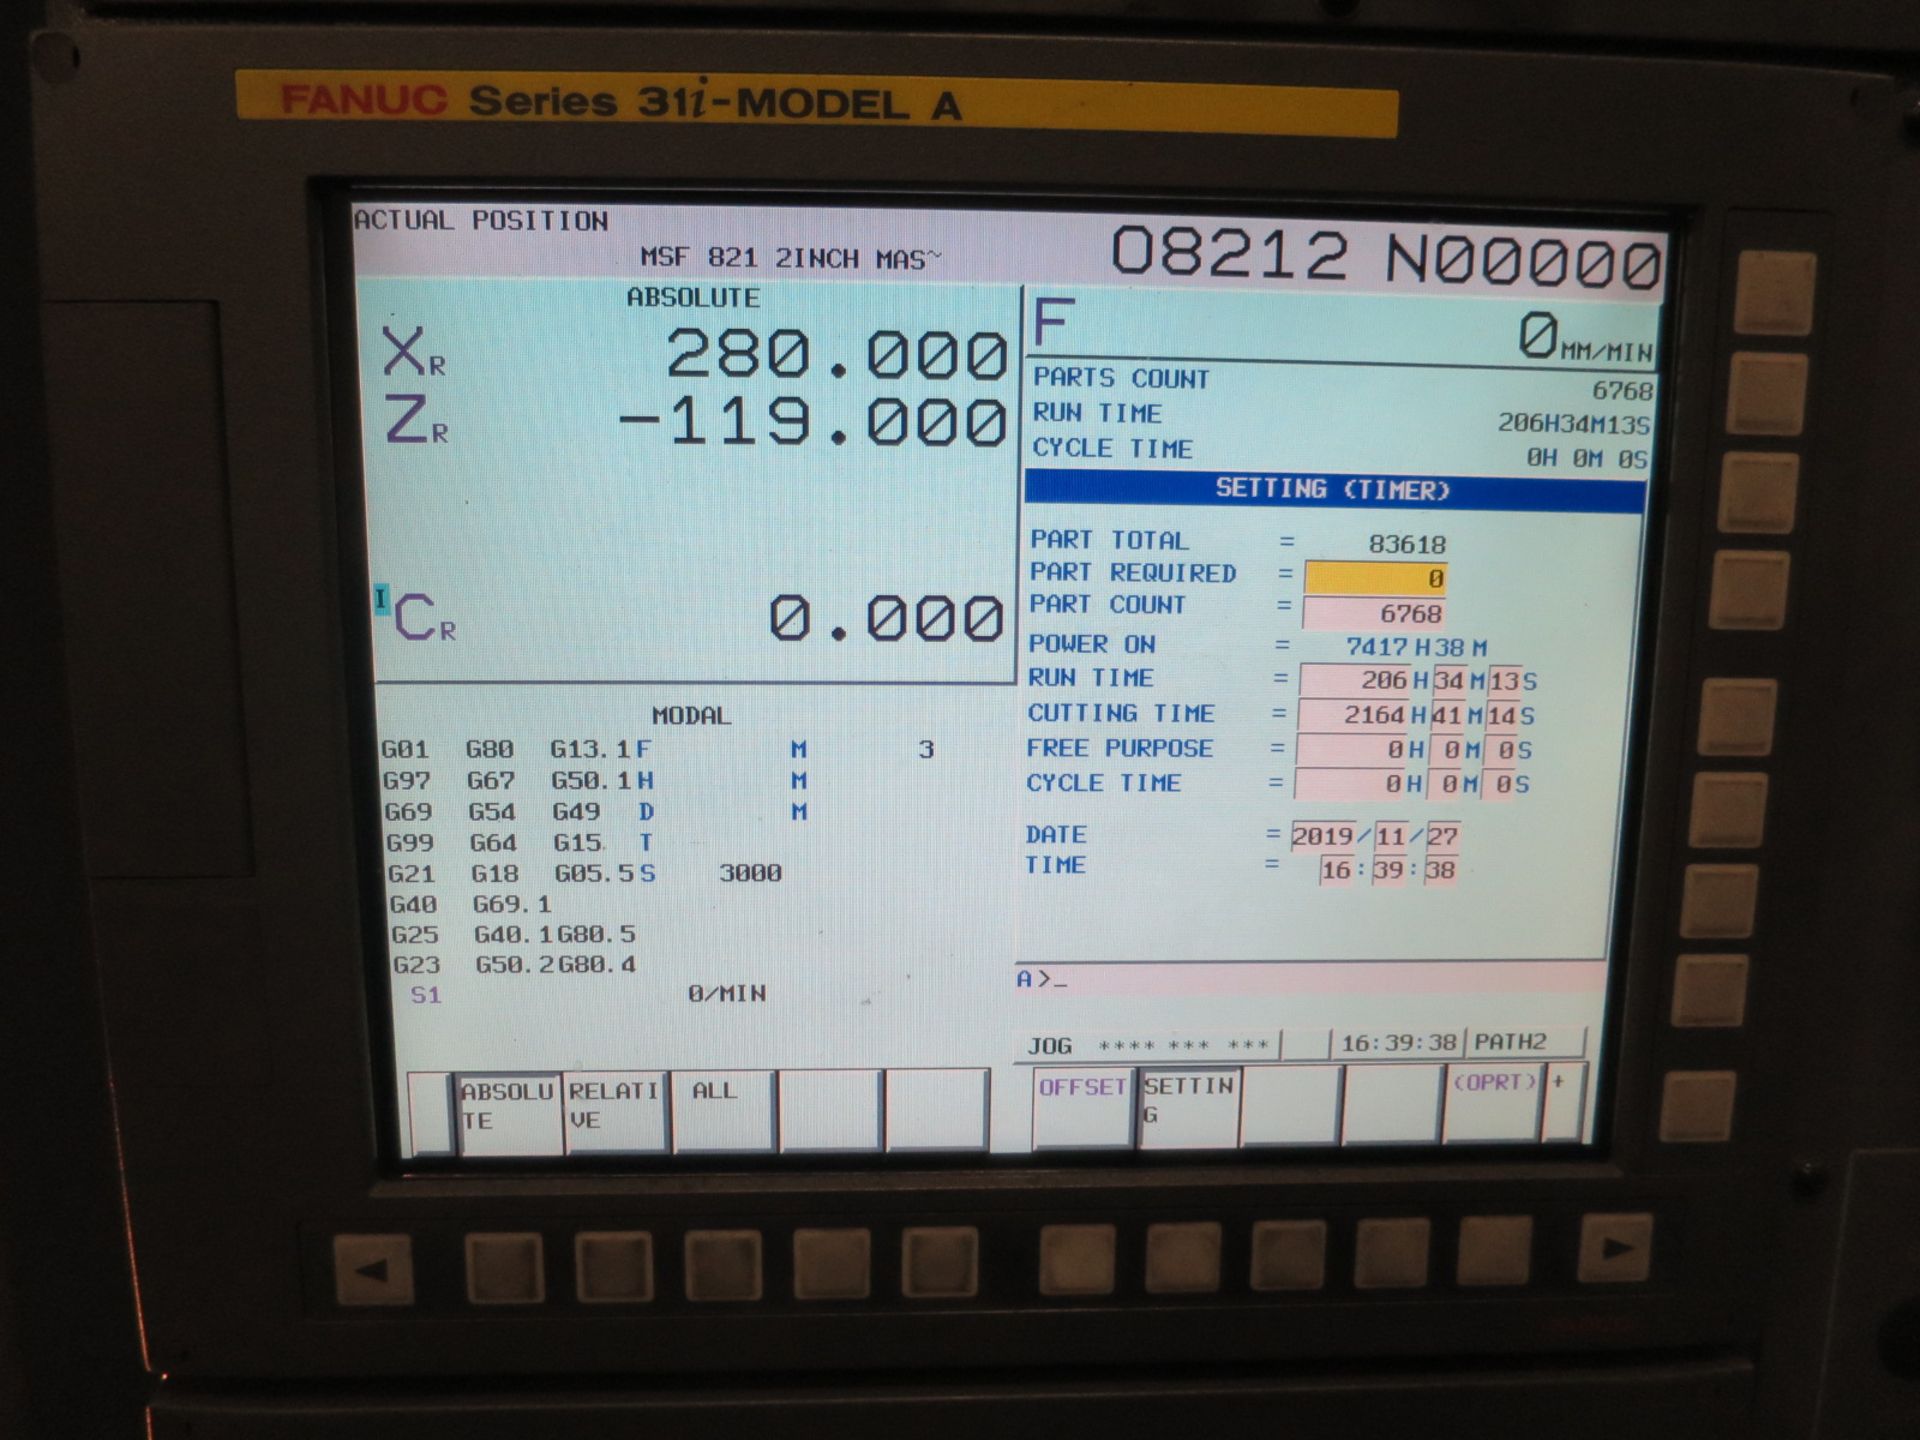 OKUMA 2SP-150HM TWIN SPINDLE 3-AXIS TURNING CENTER W/LIVE MILLING, S/N 156690, NEW 2011 - Image 7 of 11